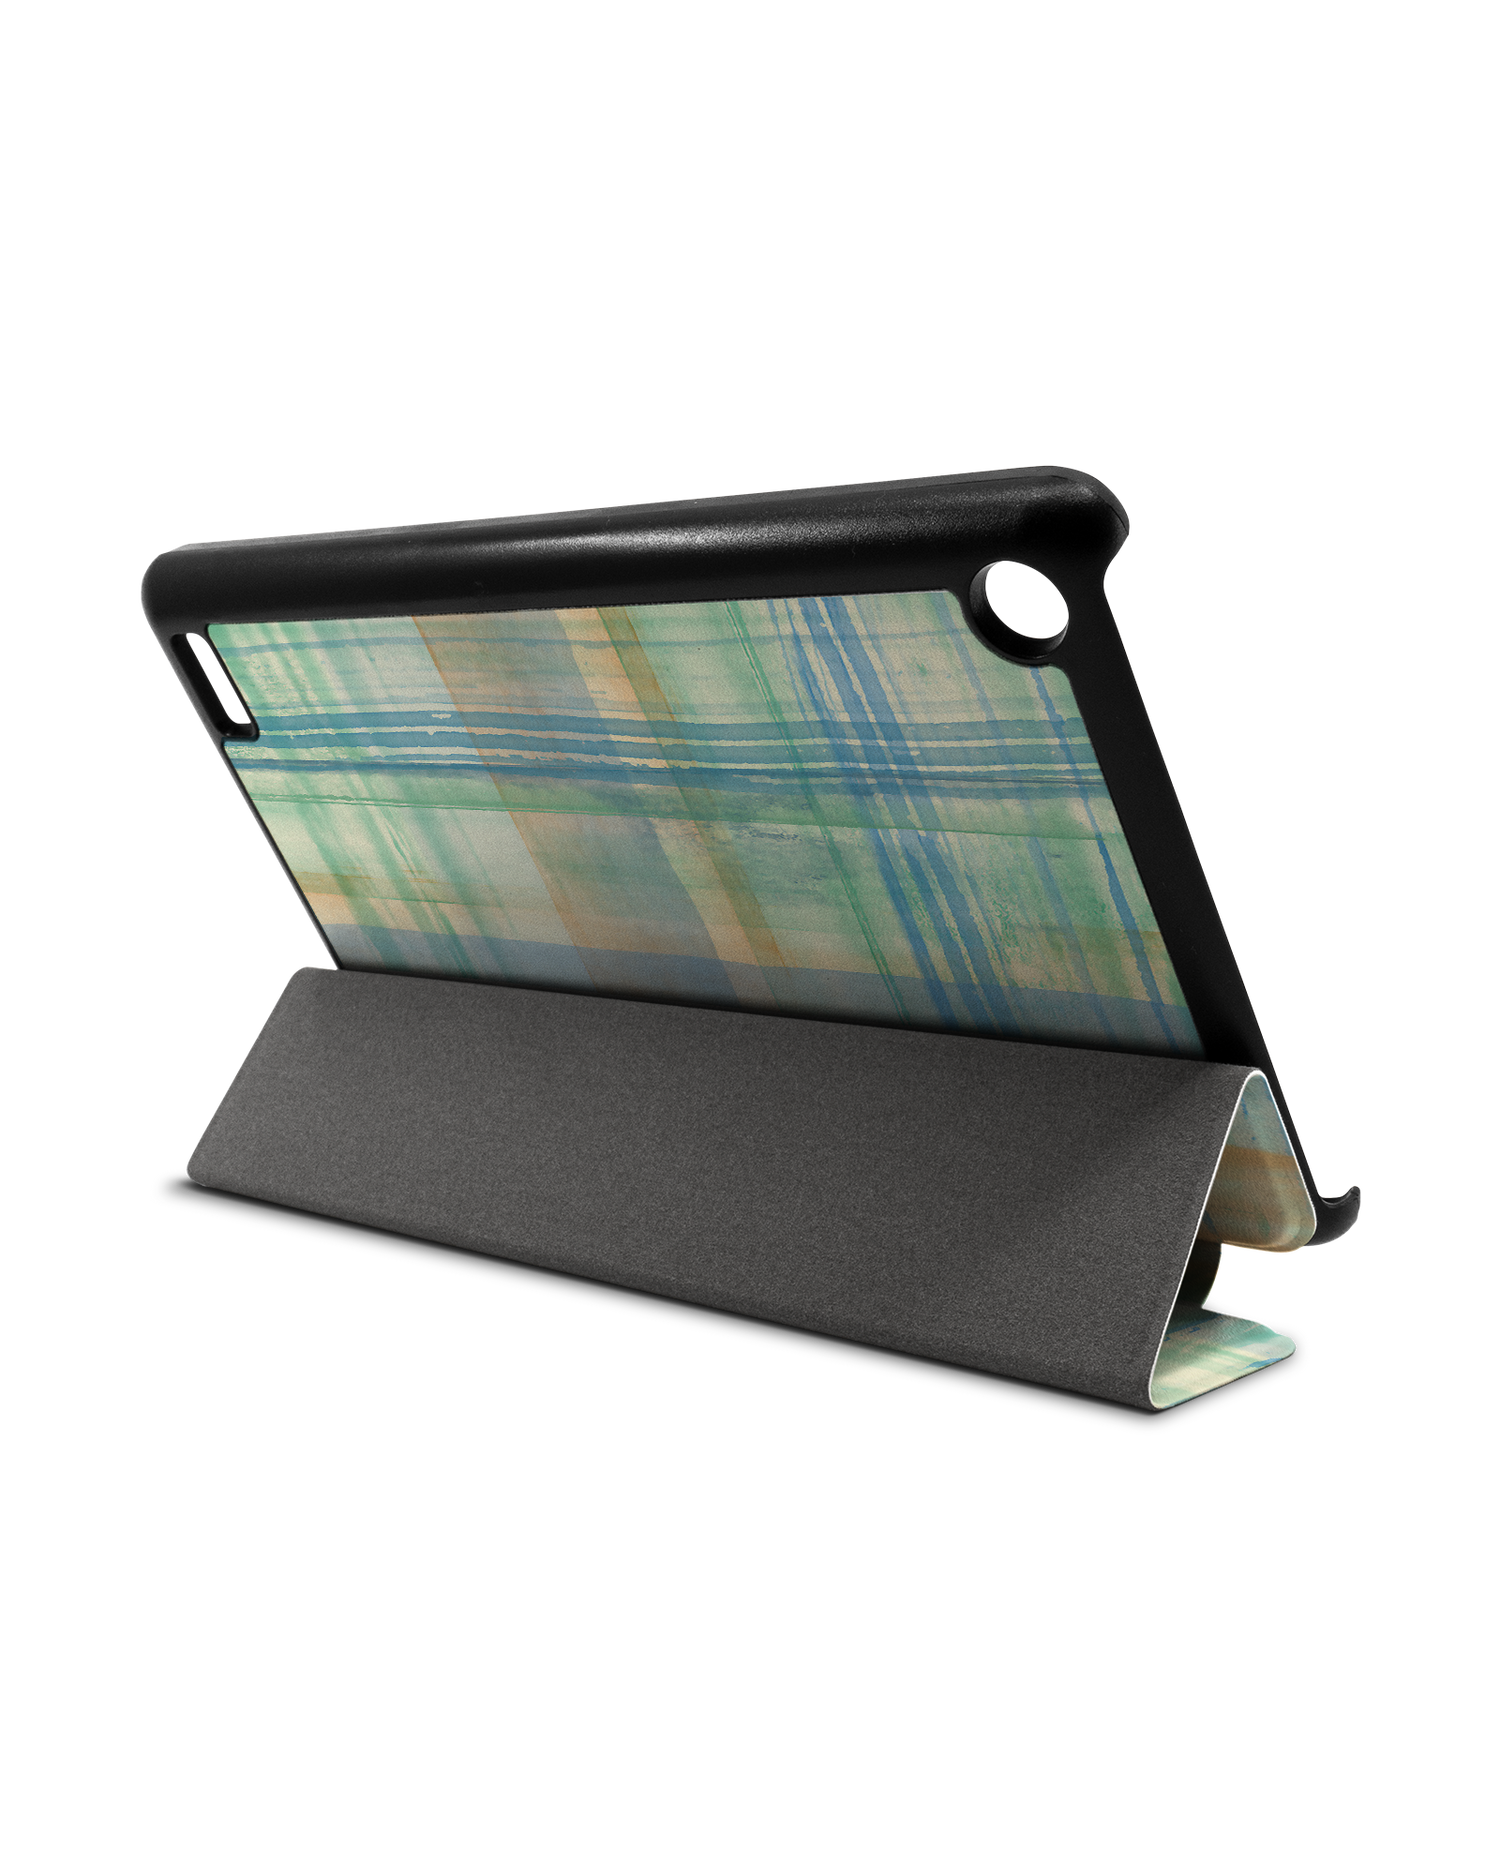 Washed Out Plaid Tablet Smart Case for Amazon Fire 7: Used as Stand